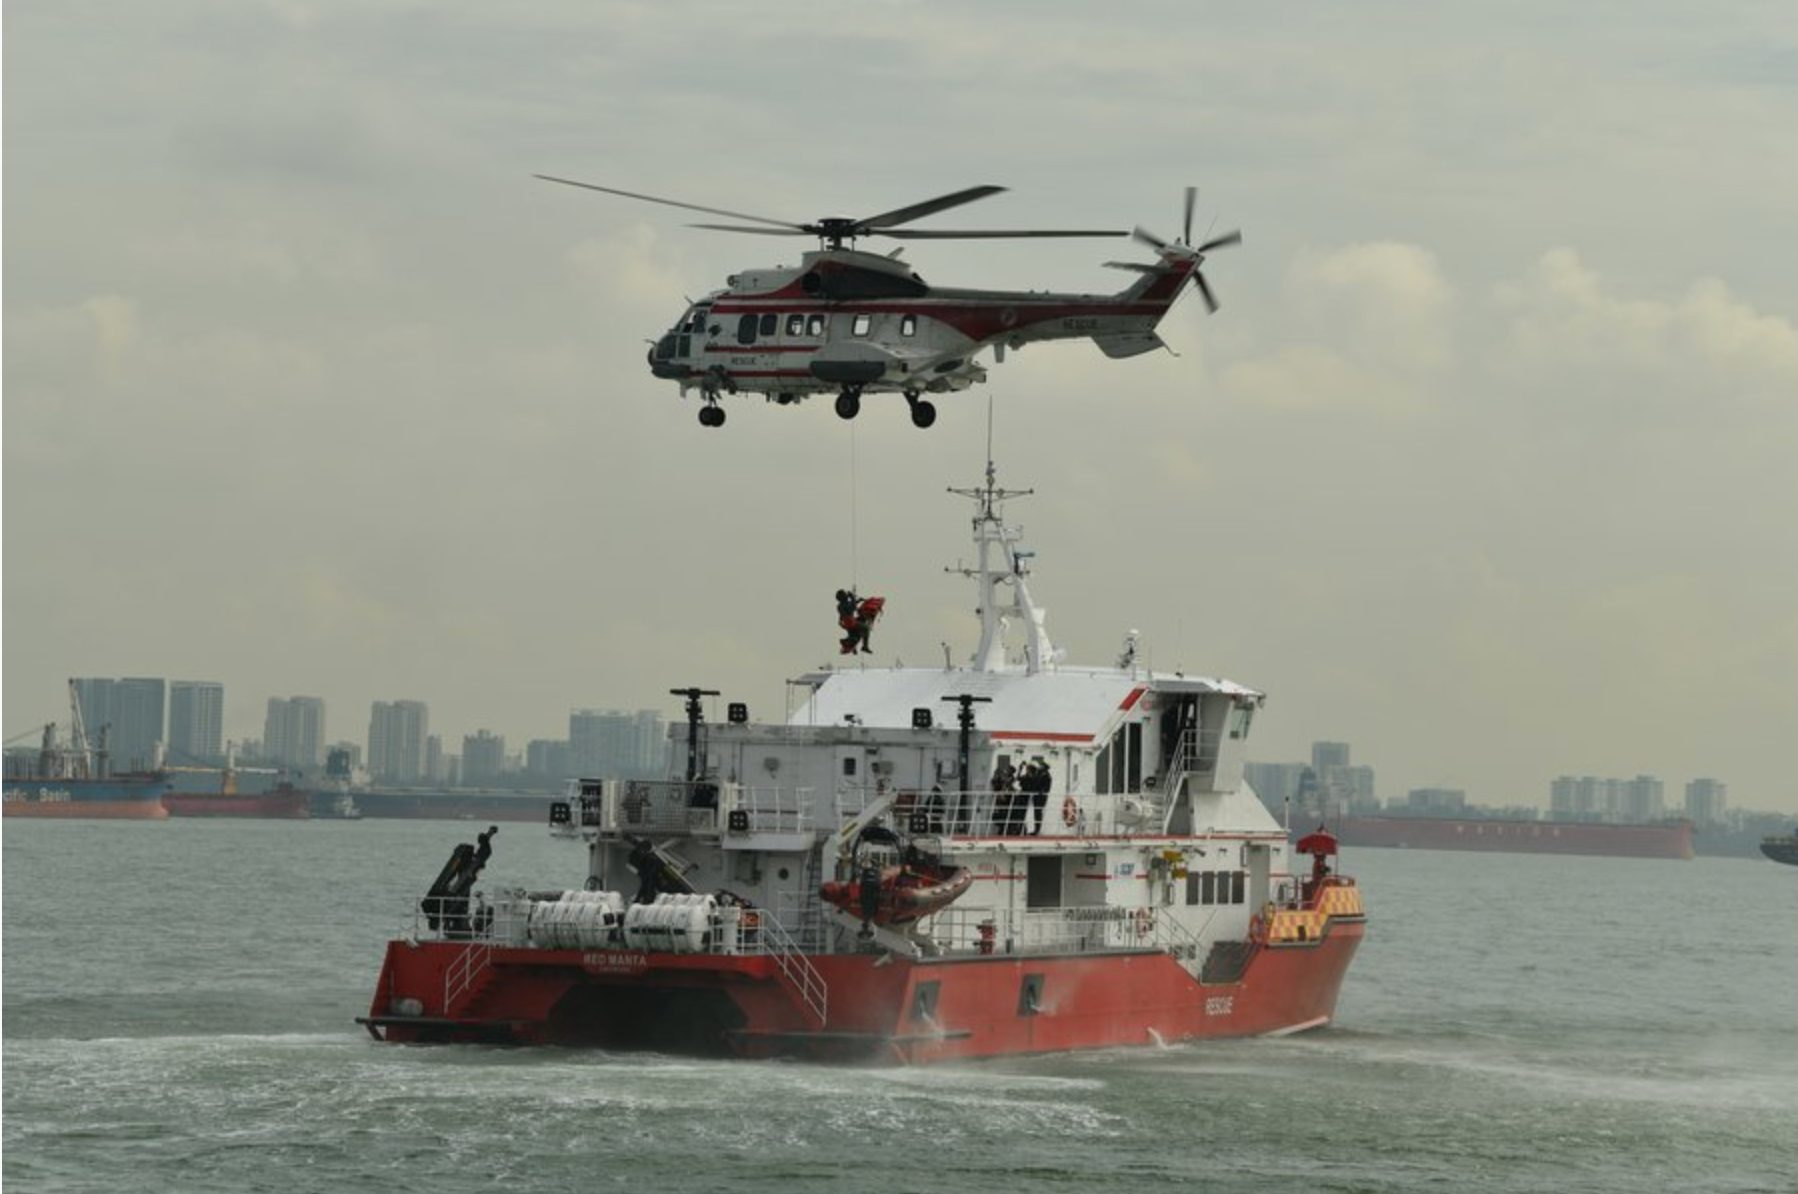 Singapore tests ferry mishap readiness in multi-agency exercise